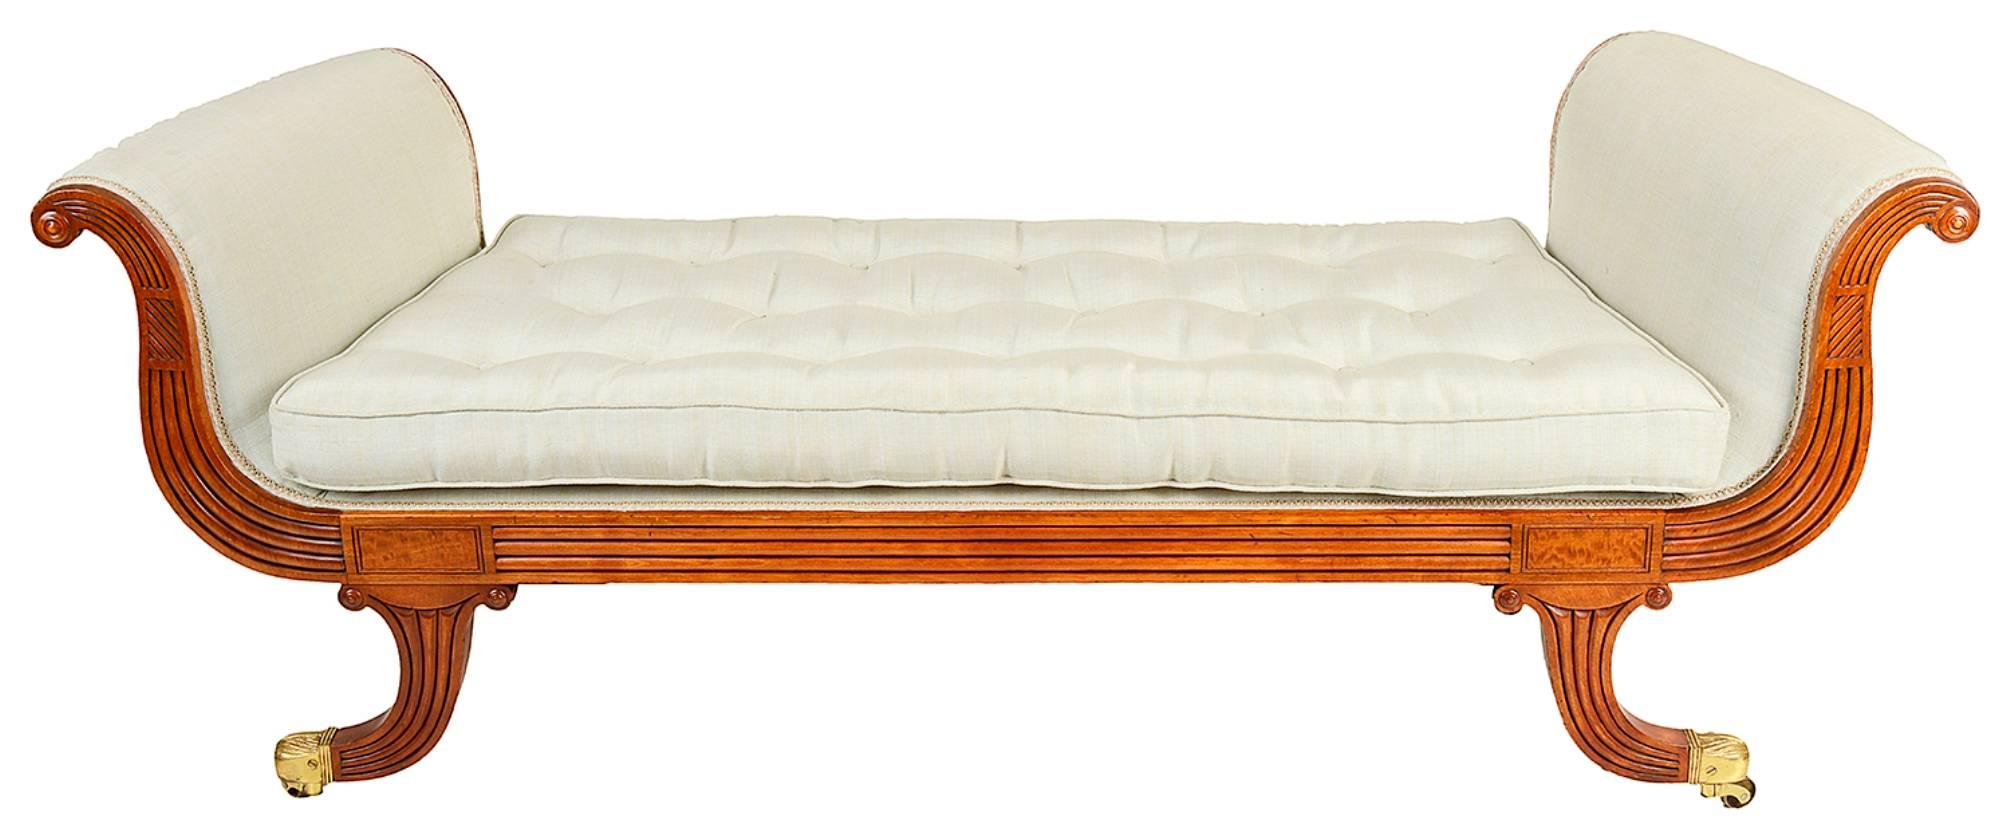 A good quality Regency period Mahogany 'Gillows influenced ' window seat. Each having reeded decoration to the fronts, stuff-over upholstery, raised on out swept feet, terminating in the original brass castors.